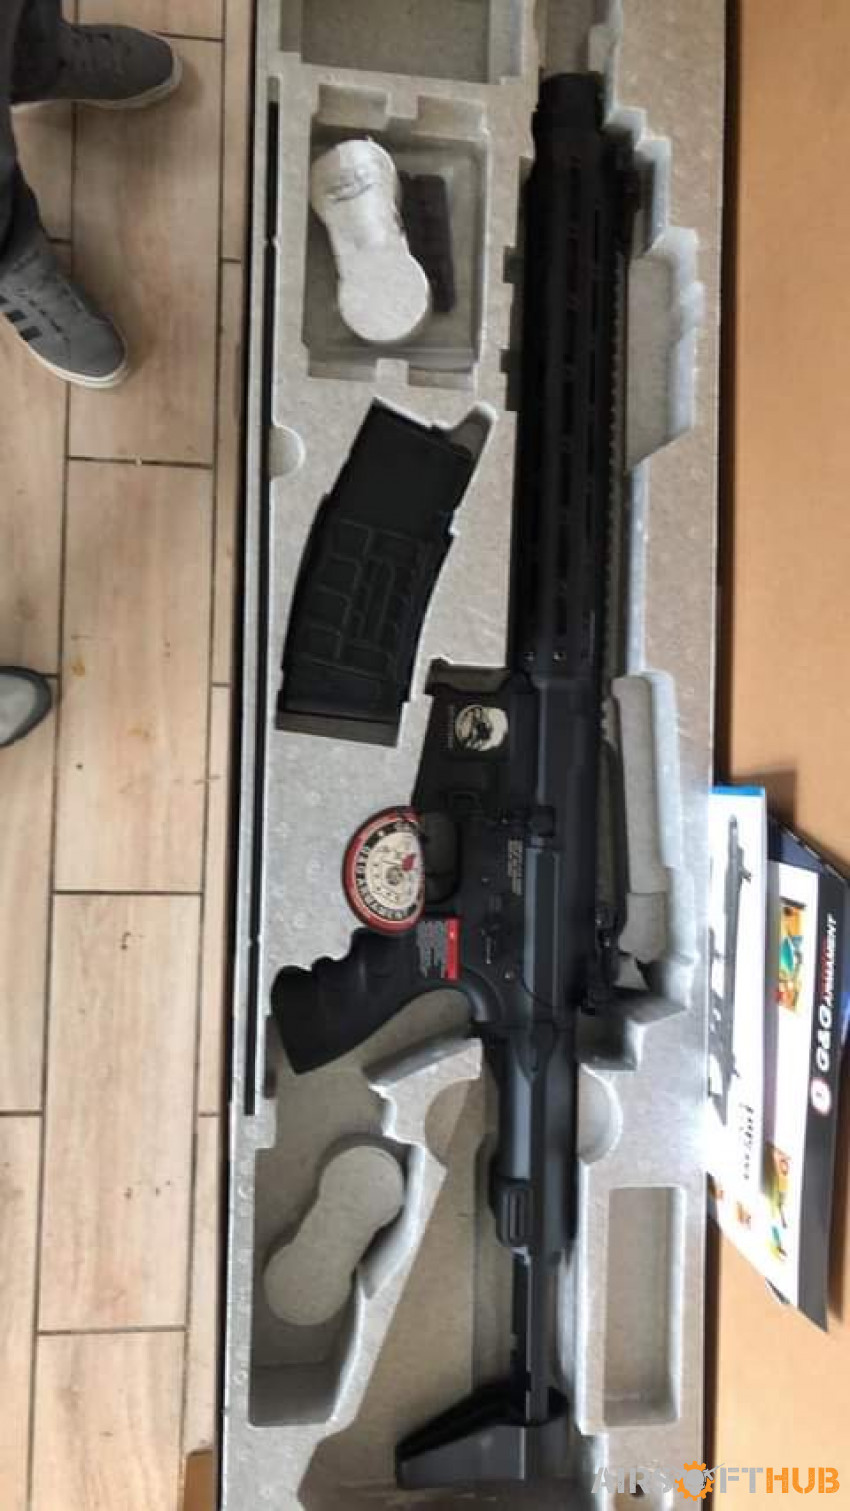 For sale brand new G&g pdw 15 - Used airsoft equipment